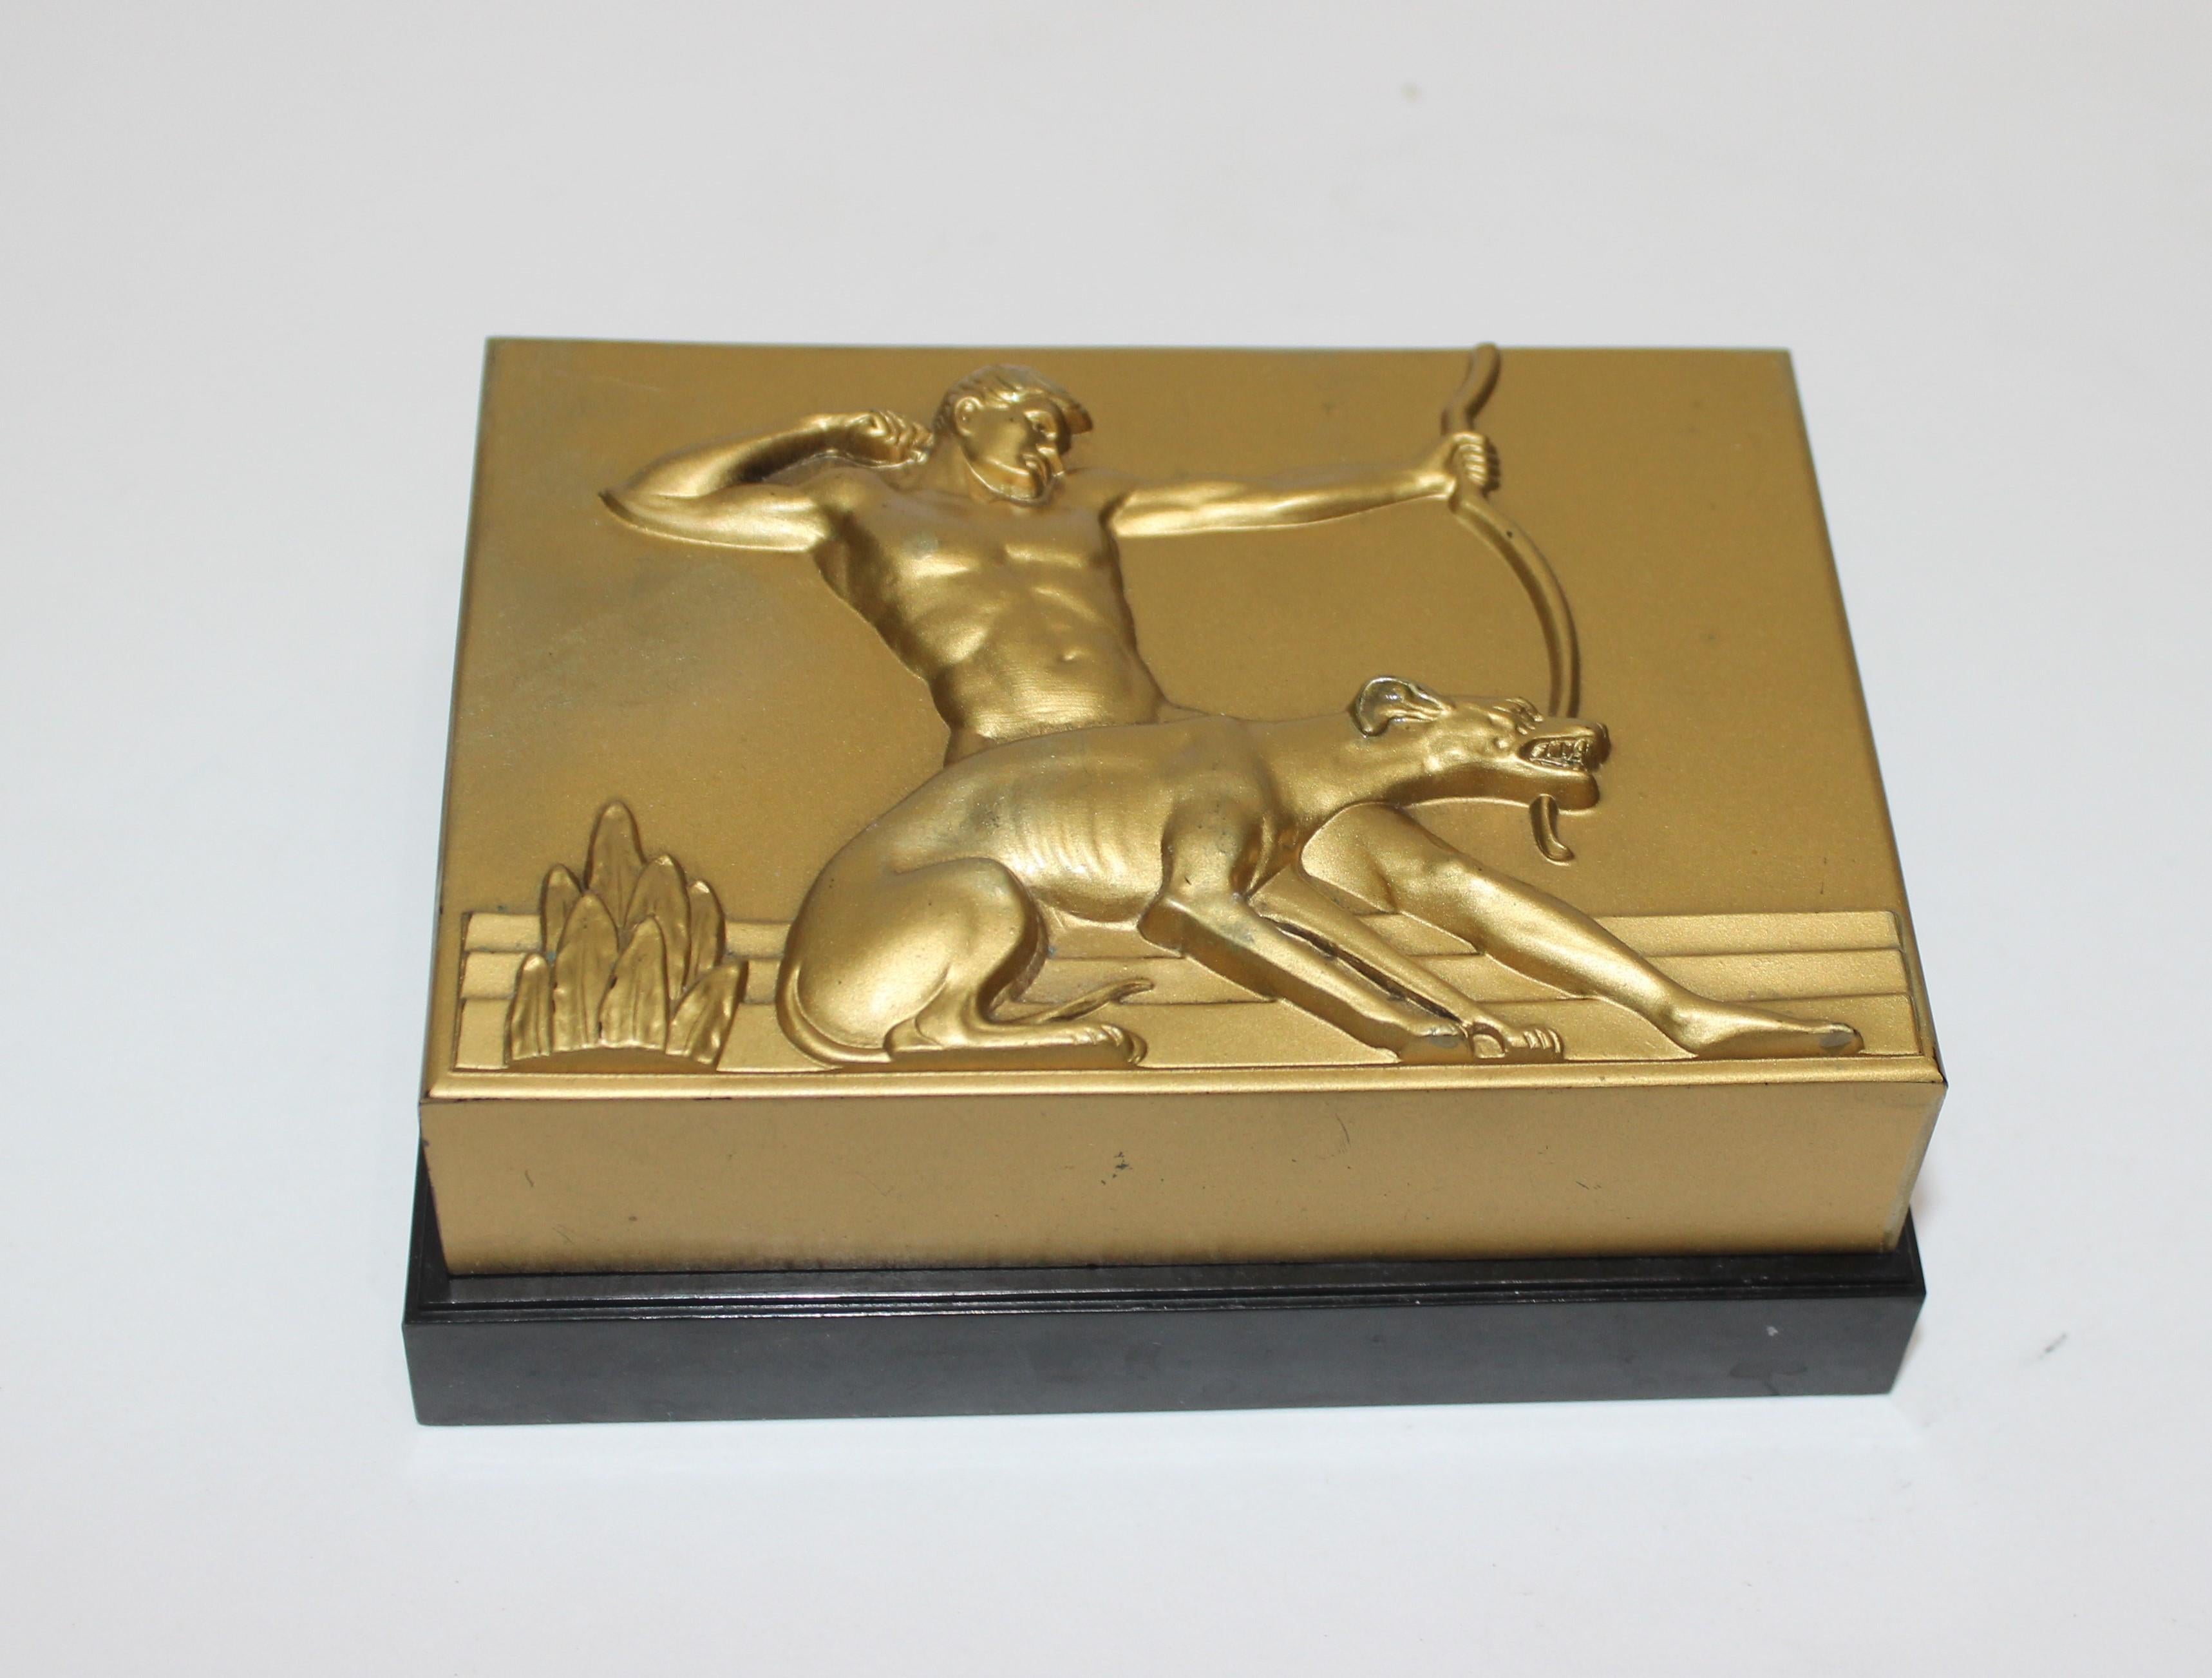 Rare rectangular Hickok Art Deco trinket box archer and hunting hound Motif 1930s from a Palm Beach estate. Also unusual is the slight lip of base visible when closed.

Signature logo inside both top and bottom; 